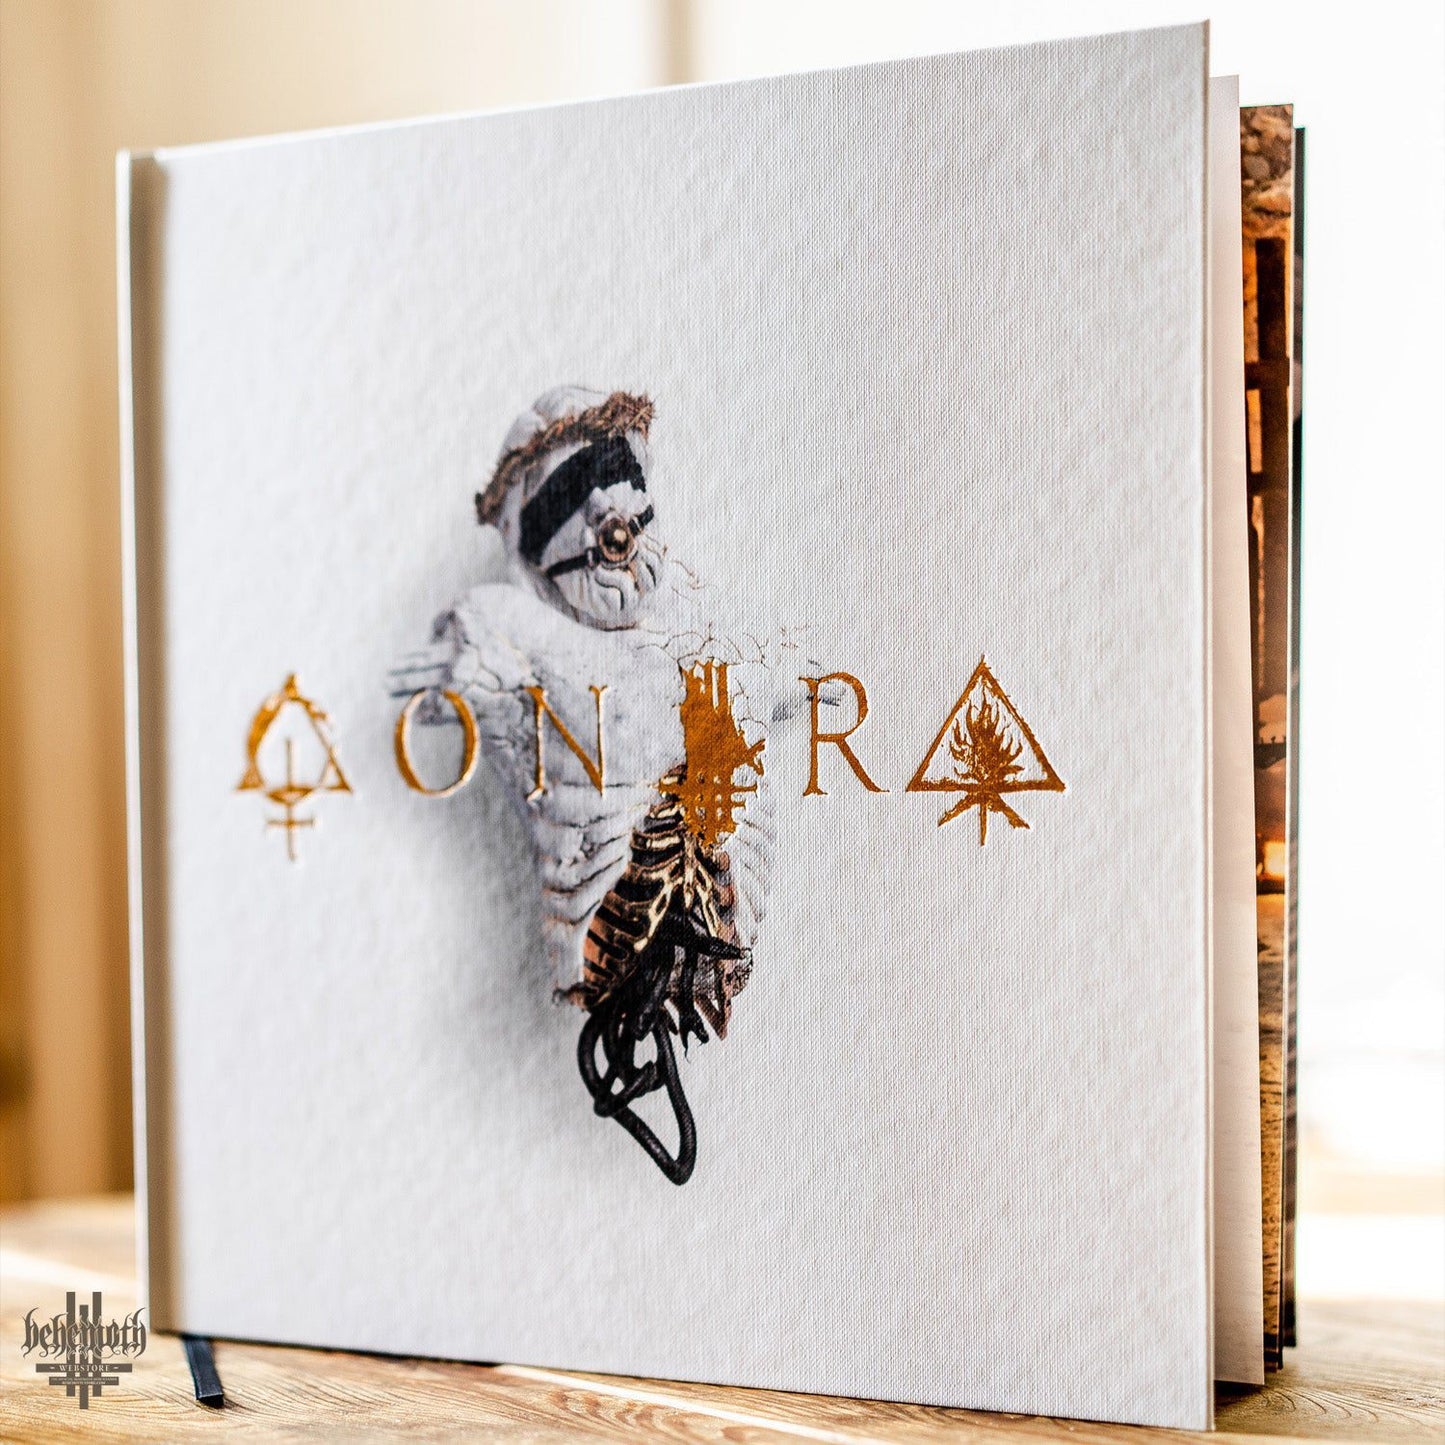 Behemoth 'Contra' hardcover book, limited, signed